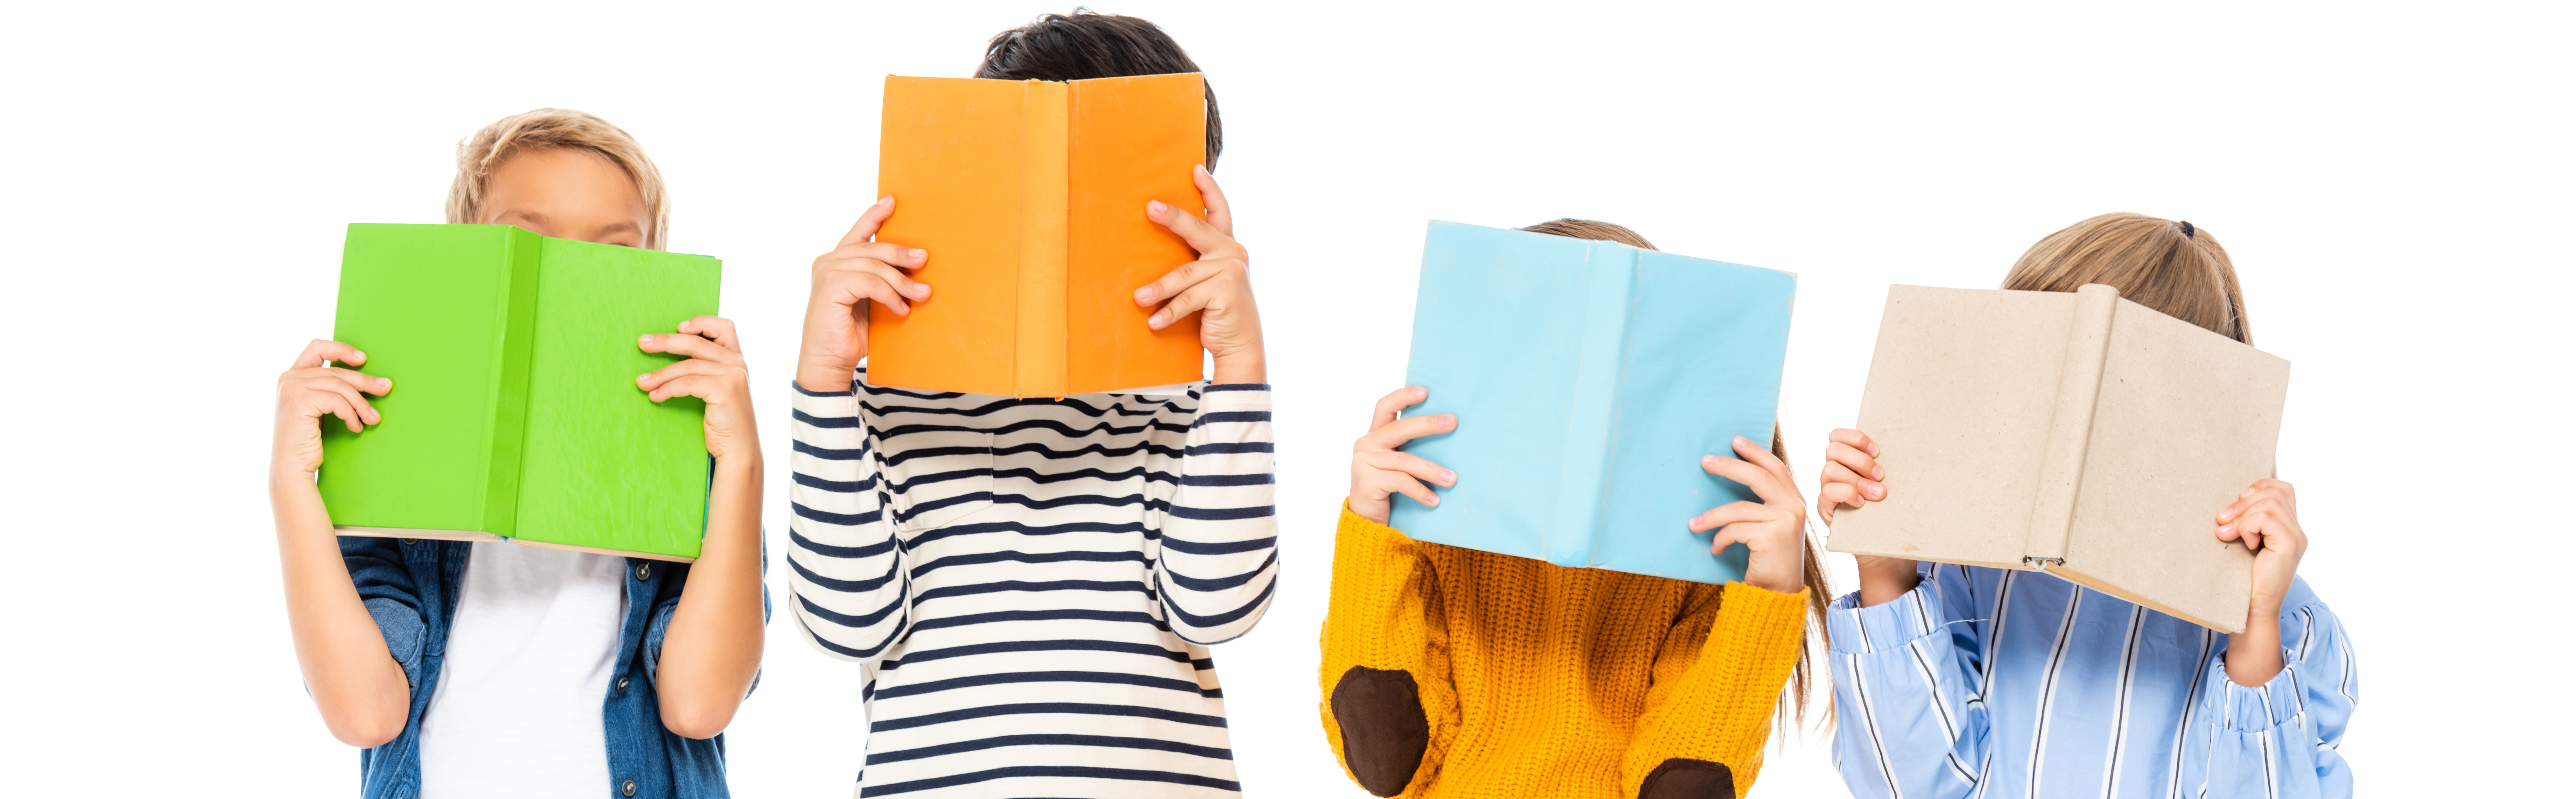 Four children holding books open in front of their faces